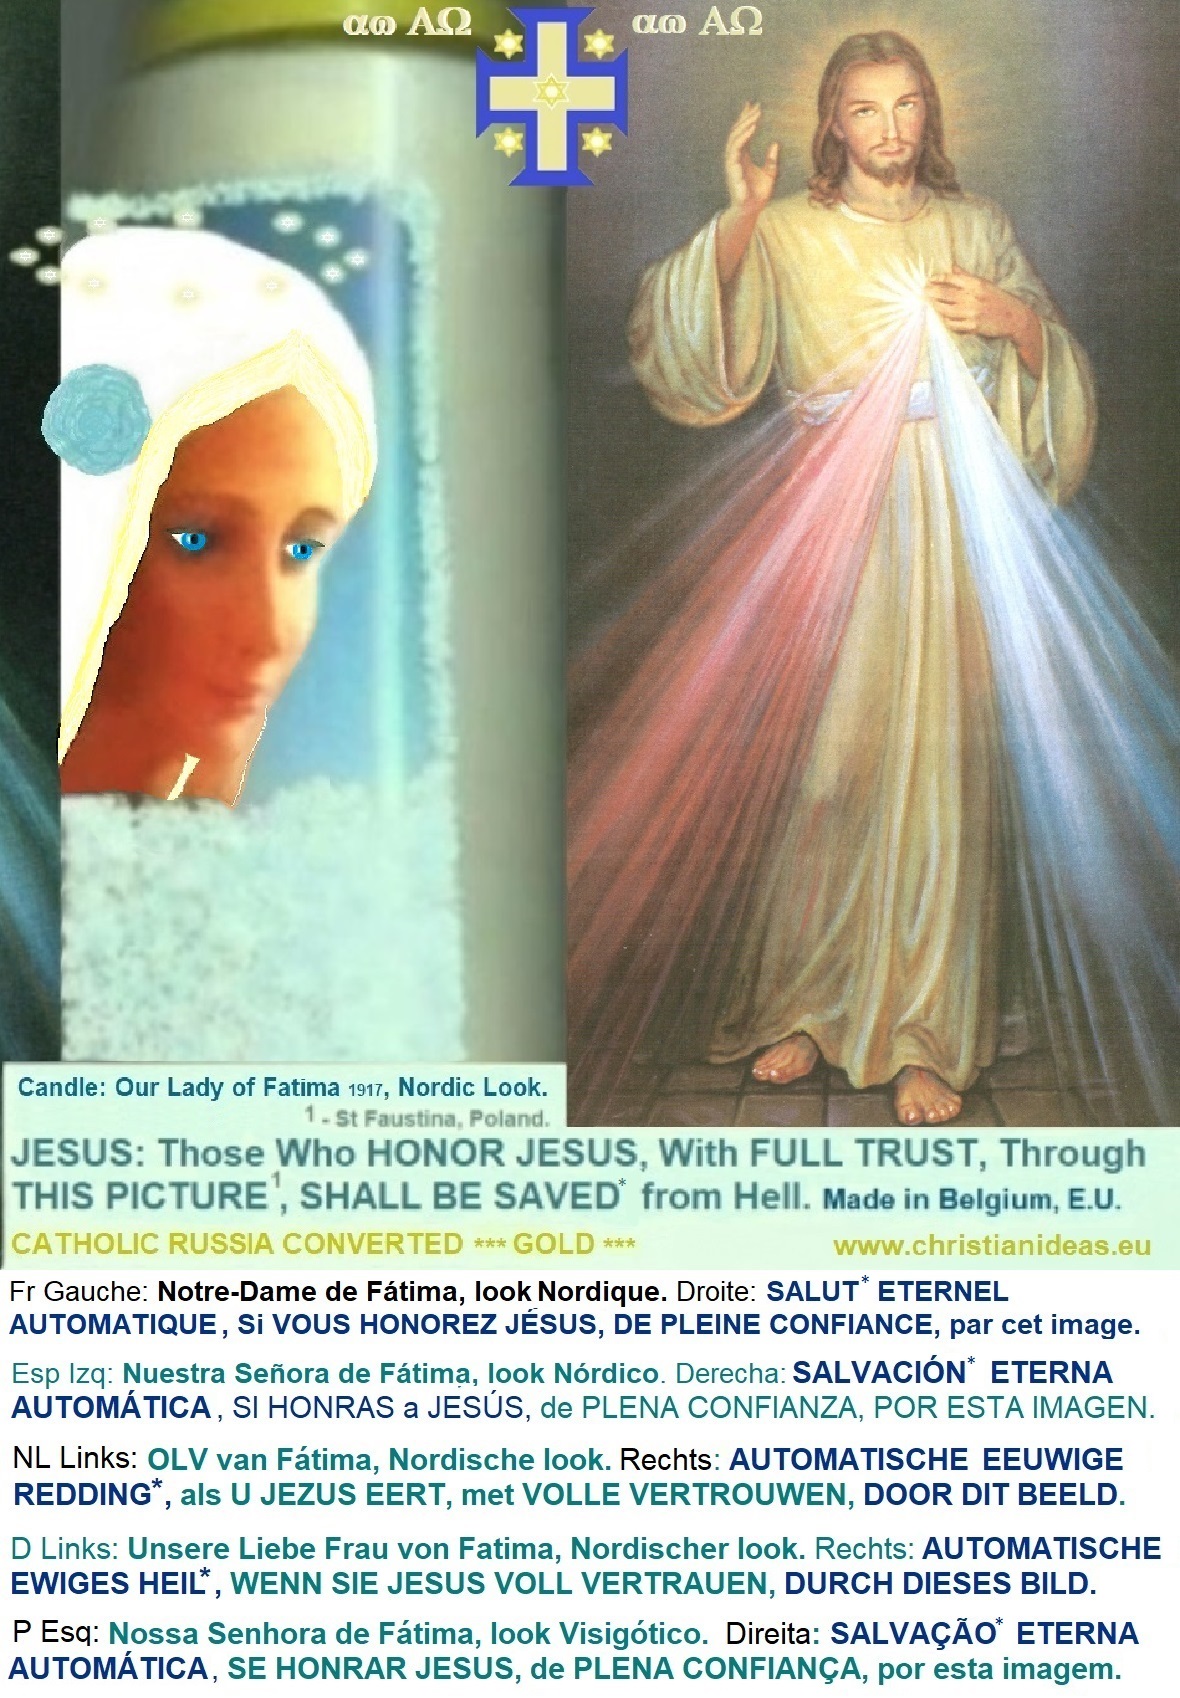 Left: Our Lady, Nordic Look. Right: Those who honor Jesus, with full trust, through this picture , shall be saved*